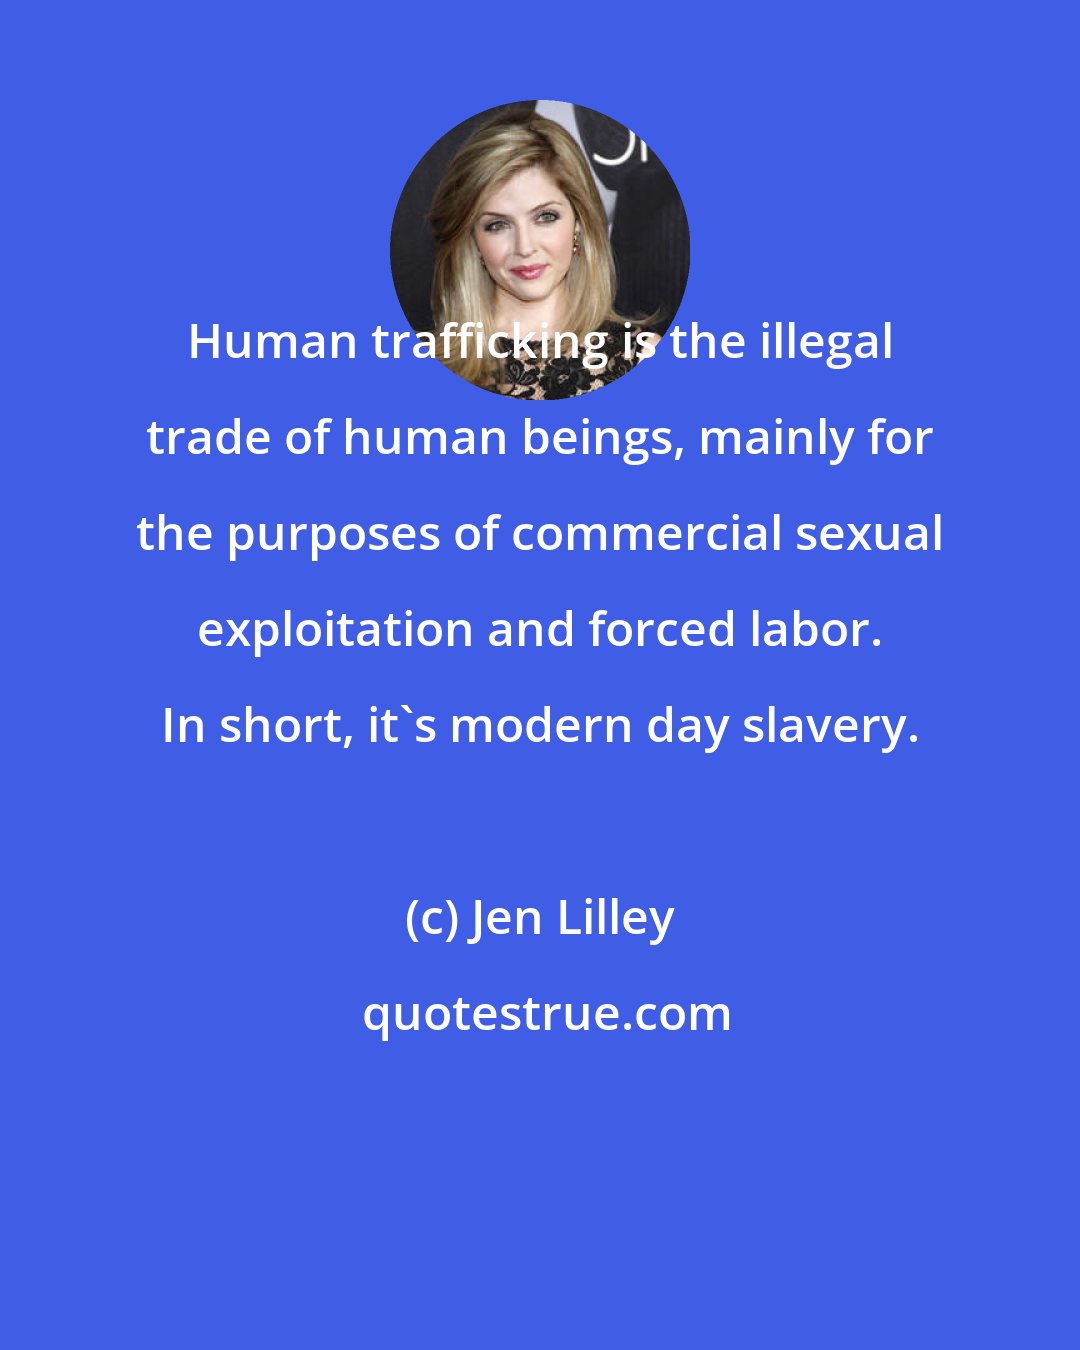 Jen Lilley: Human trafficking is the illegal trade of human beings, mainly for the purposes of commercial sexual exploitation and forced labor. In short, it's modern day slavery.